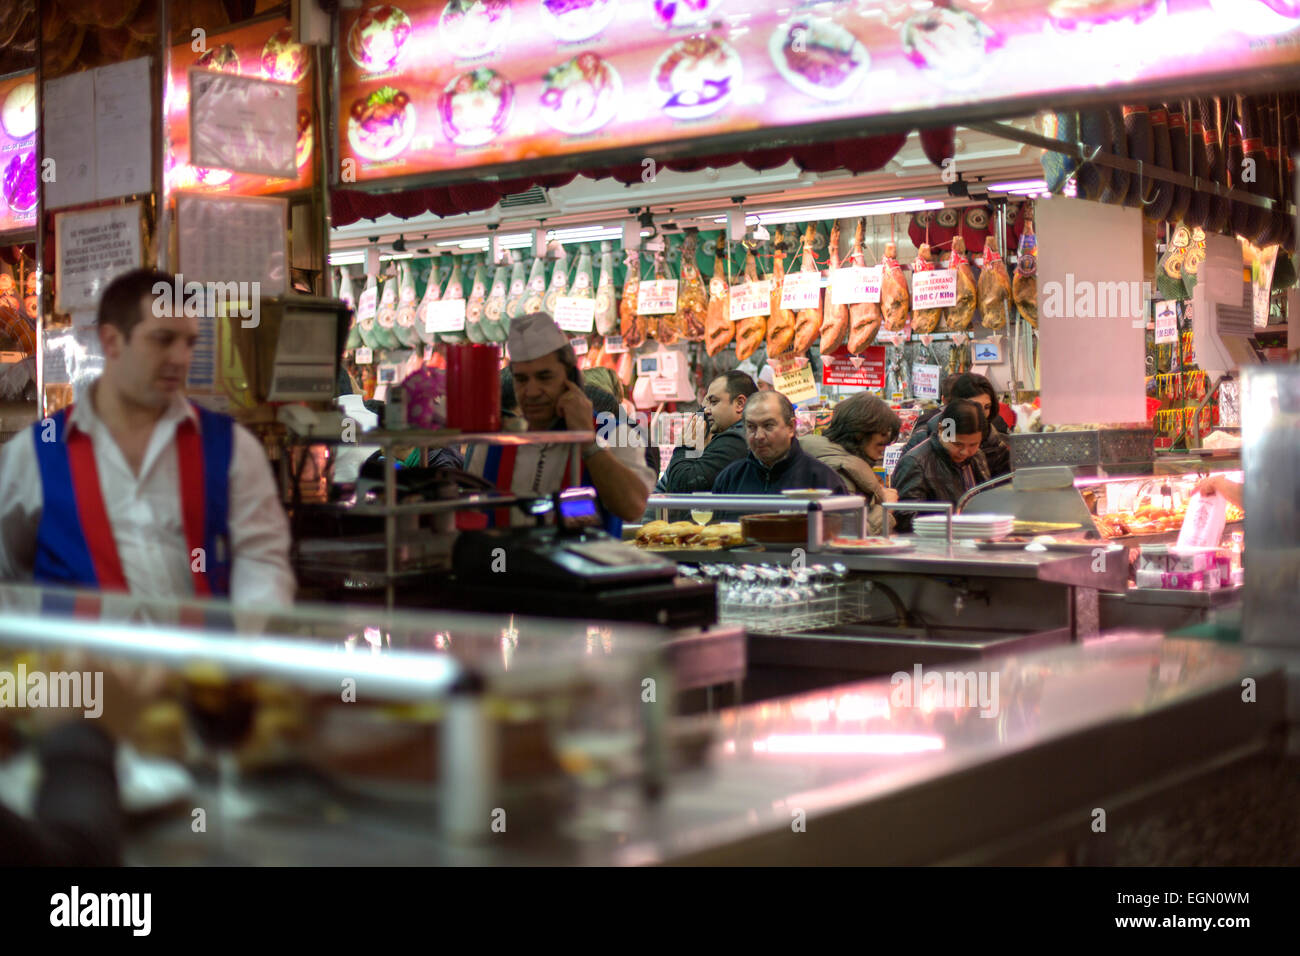 bar ham jamon crowded beer lunch stop tapas cafe Stock Photo